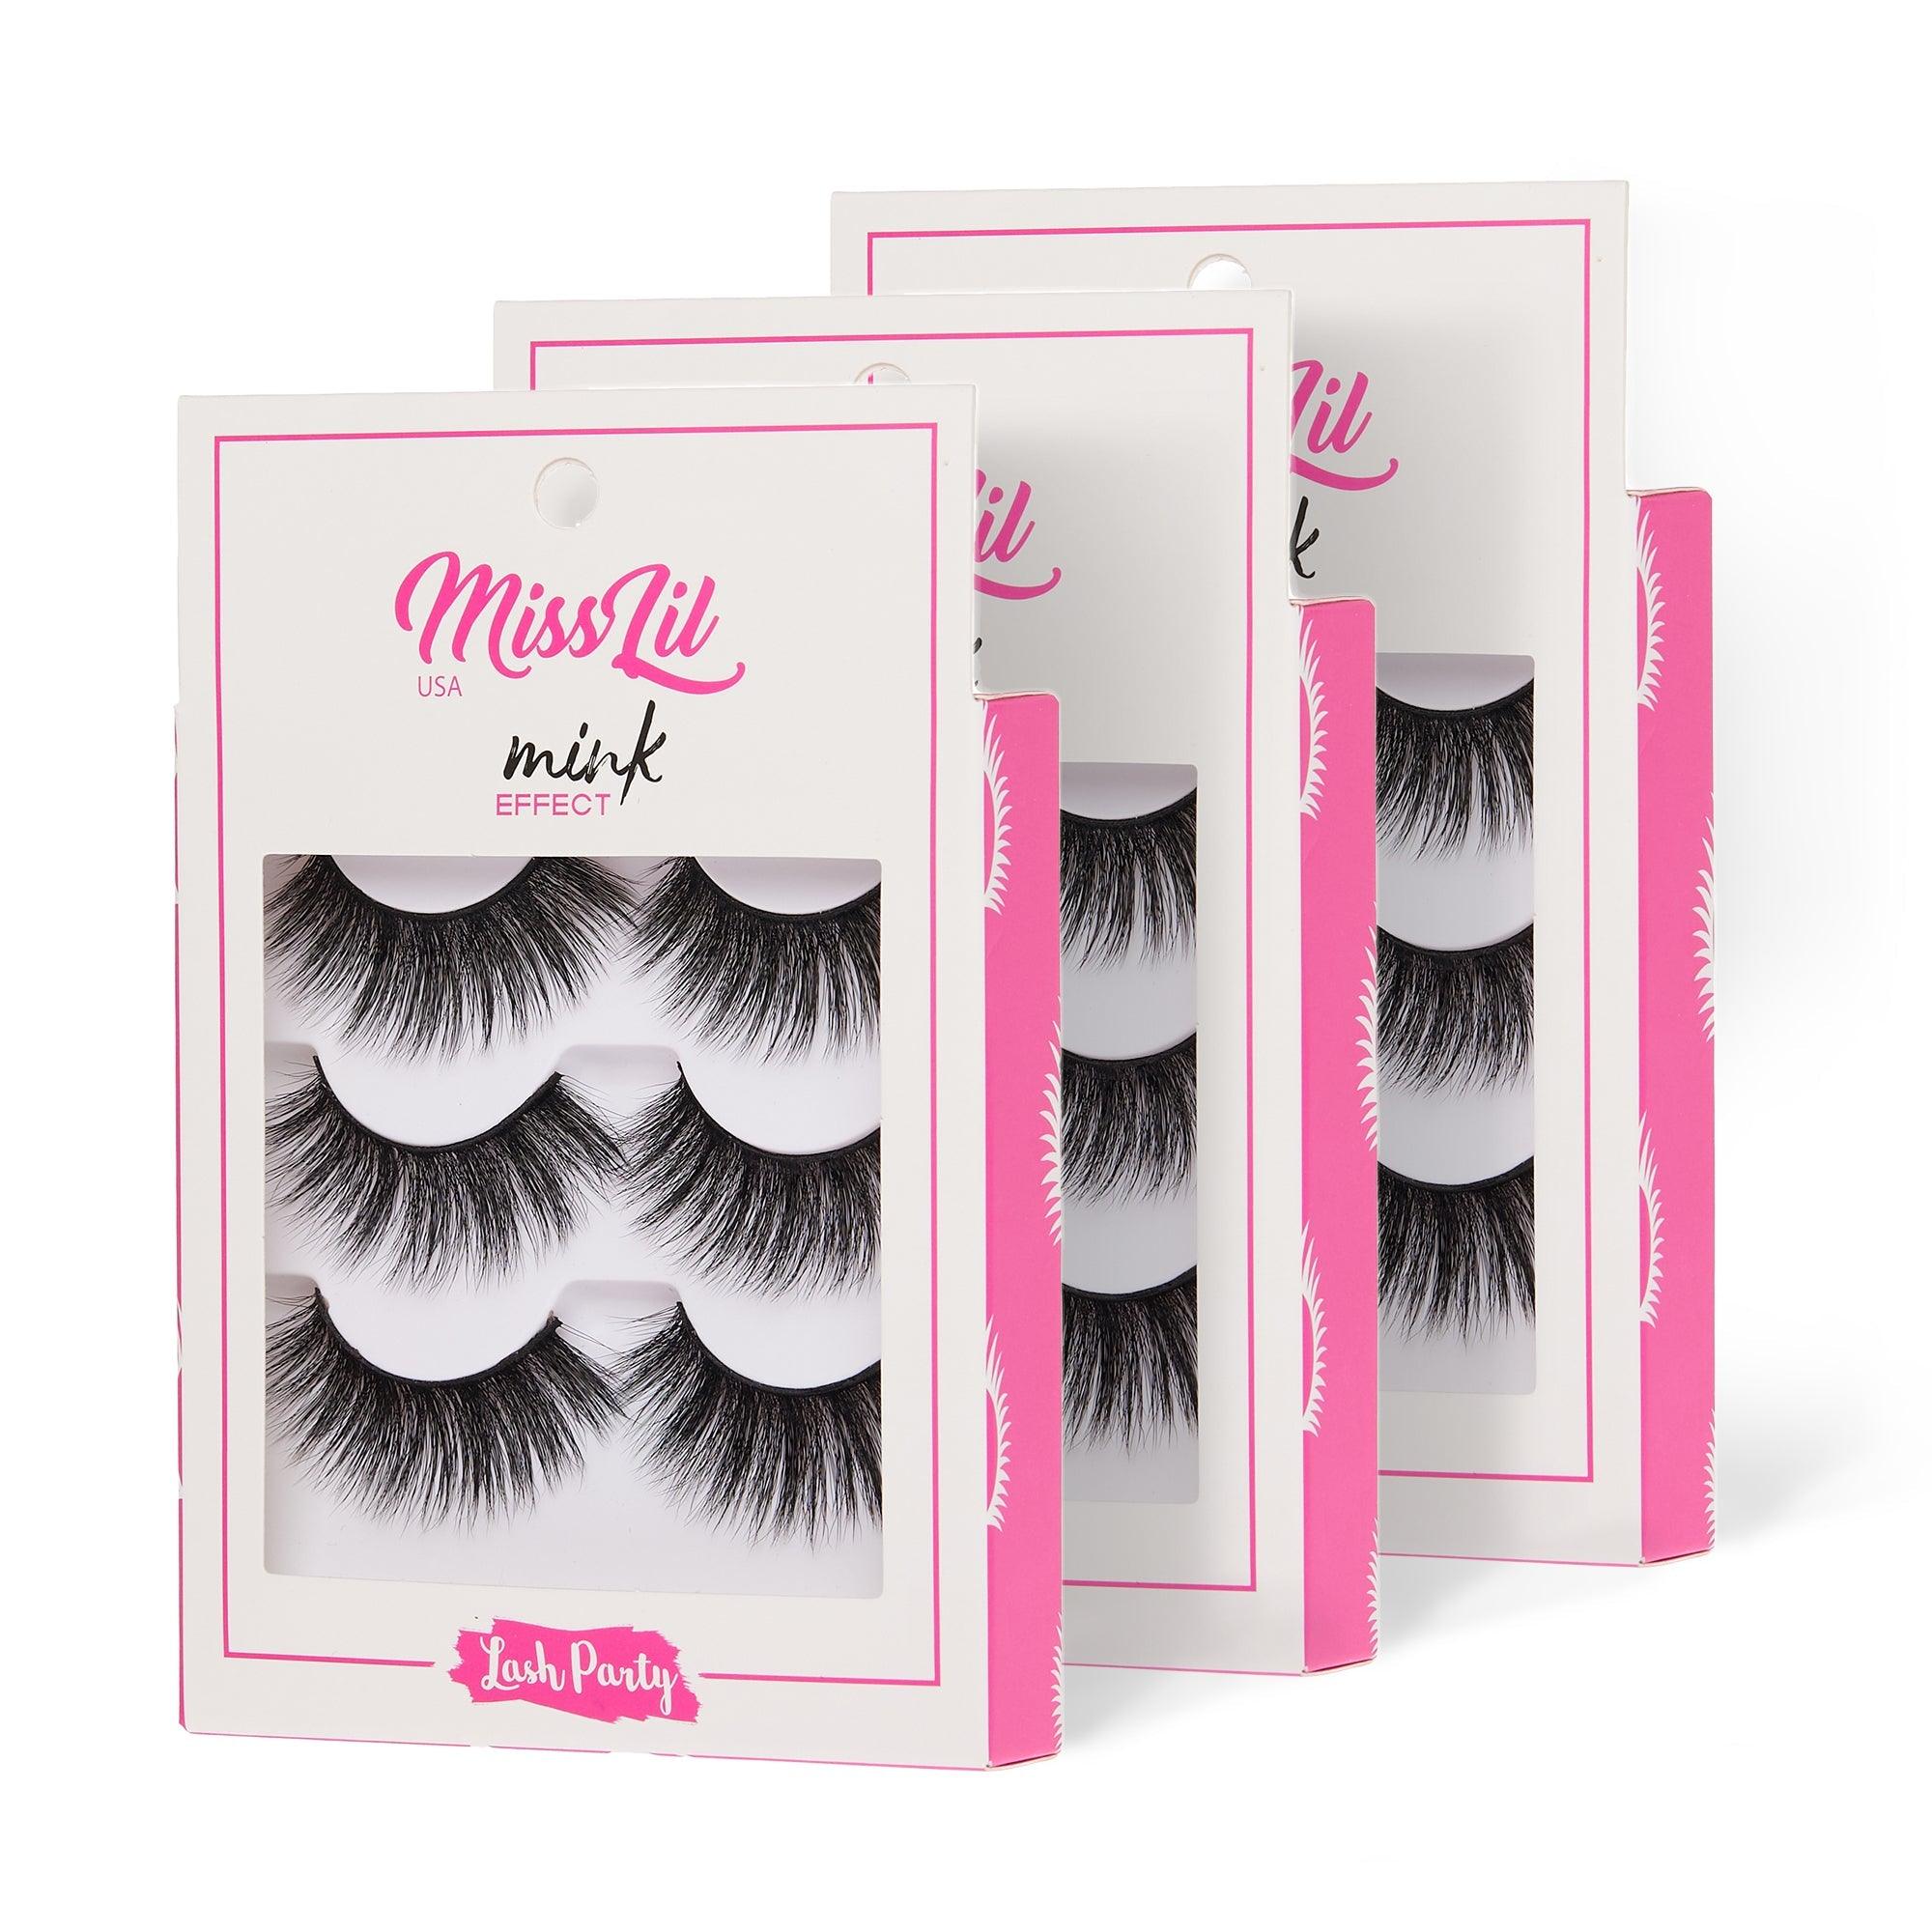 3-Pair Faux Mink Effect Eyelashes - Lash Party Collection #1 - Pack of 12 - Miss Lil USA